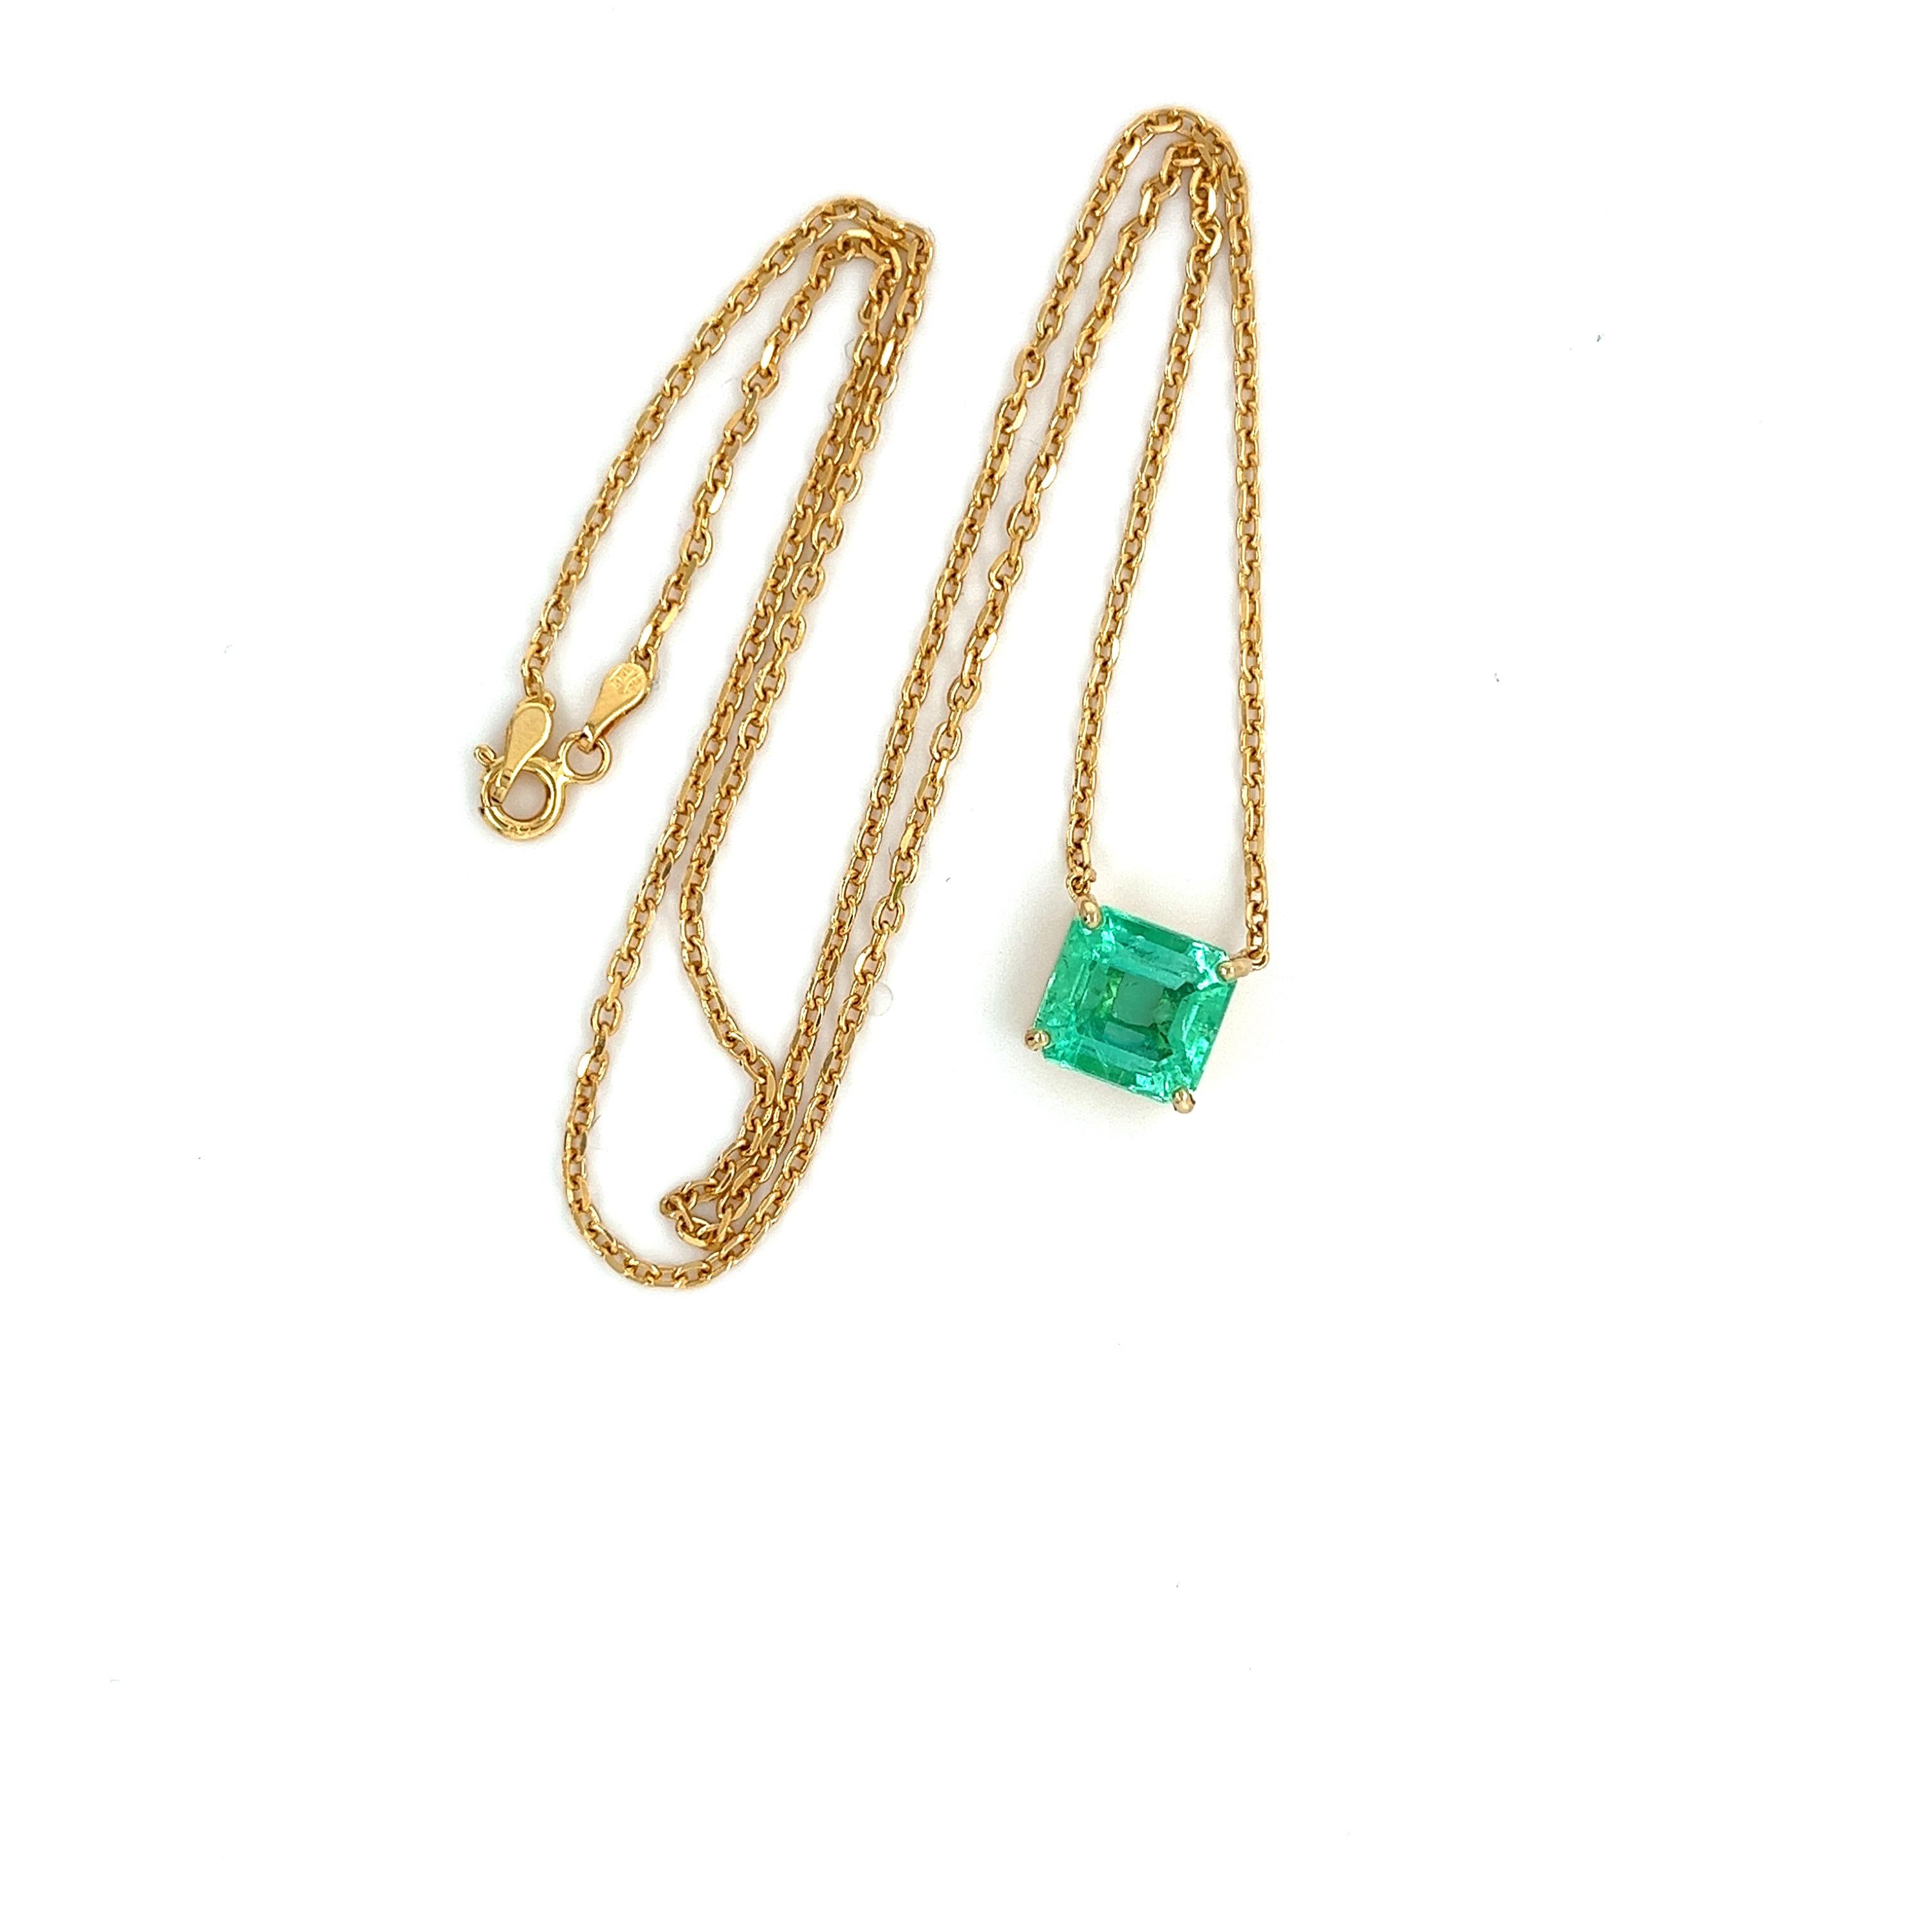 Emerald Cut 4.38 Carat Colombian Emerald in 18K Gold Floating Connecting Chain Necklace For Sale